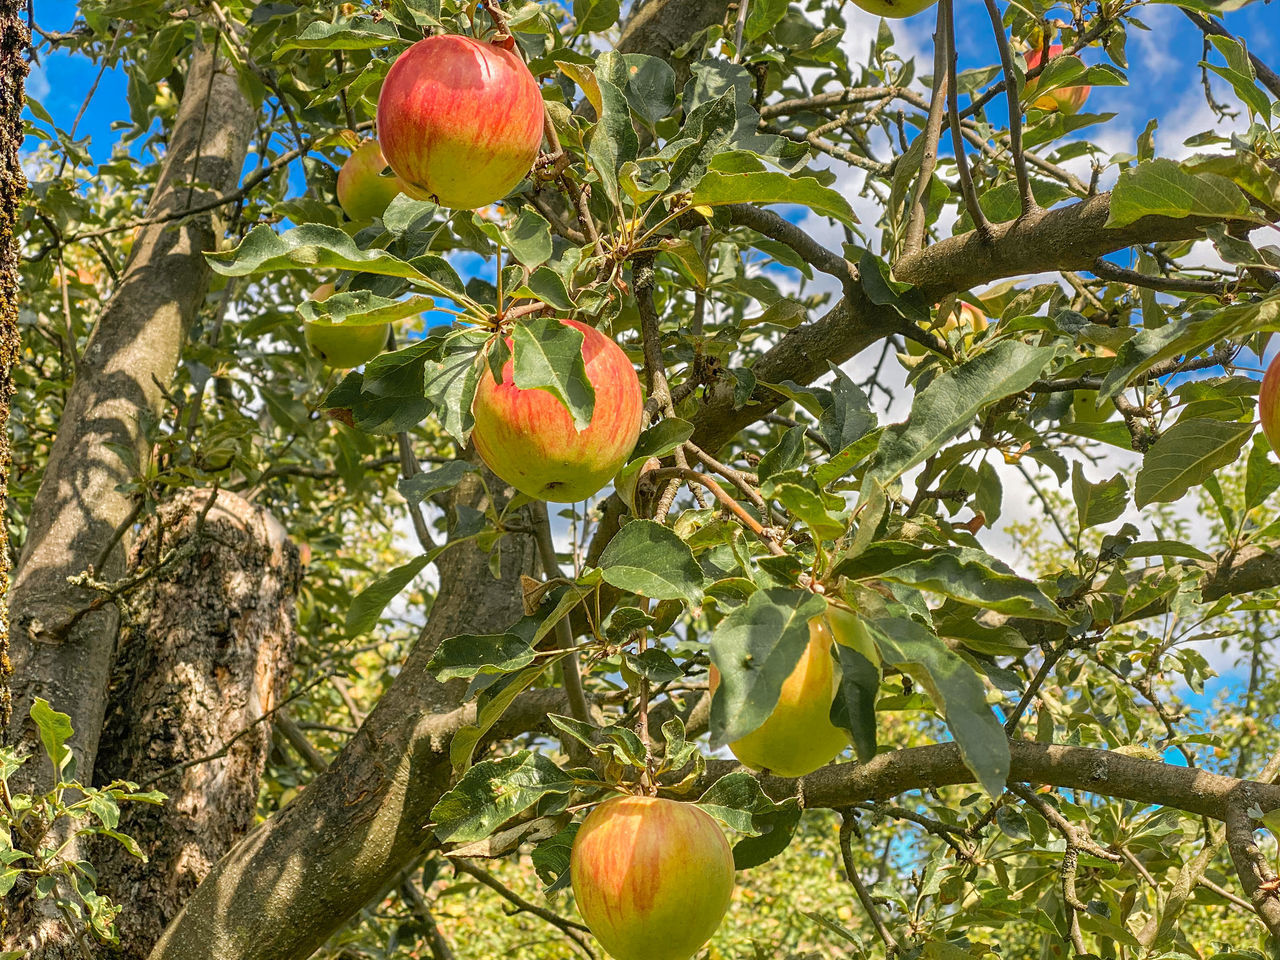 LOW ANGLE VIEW OF APPLE TREE